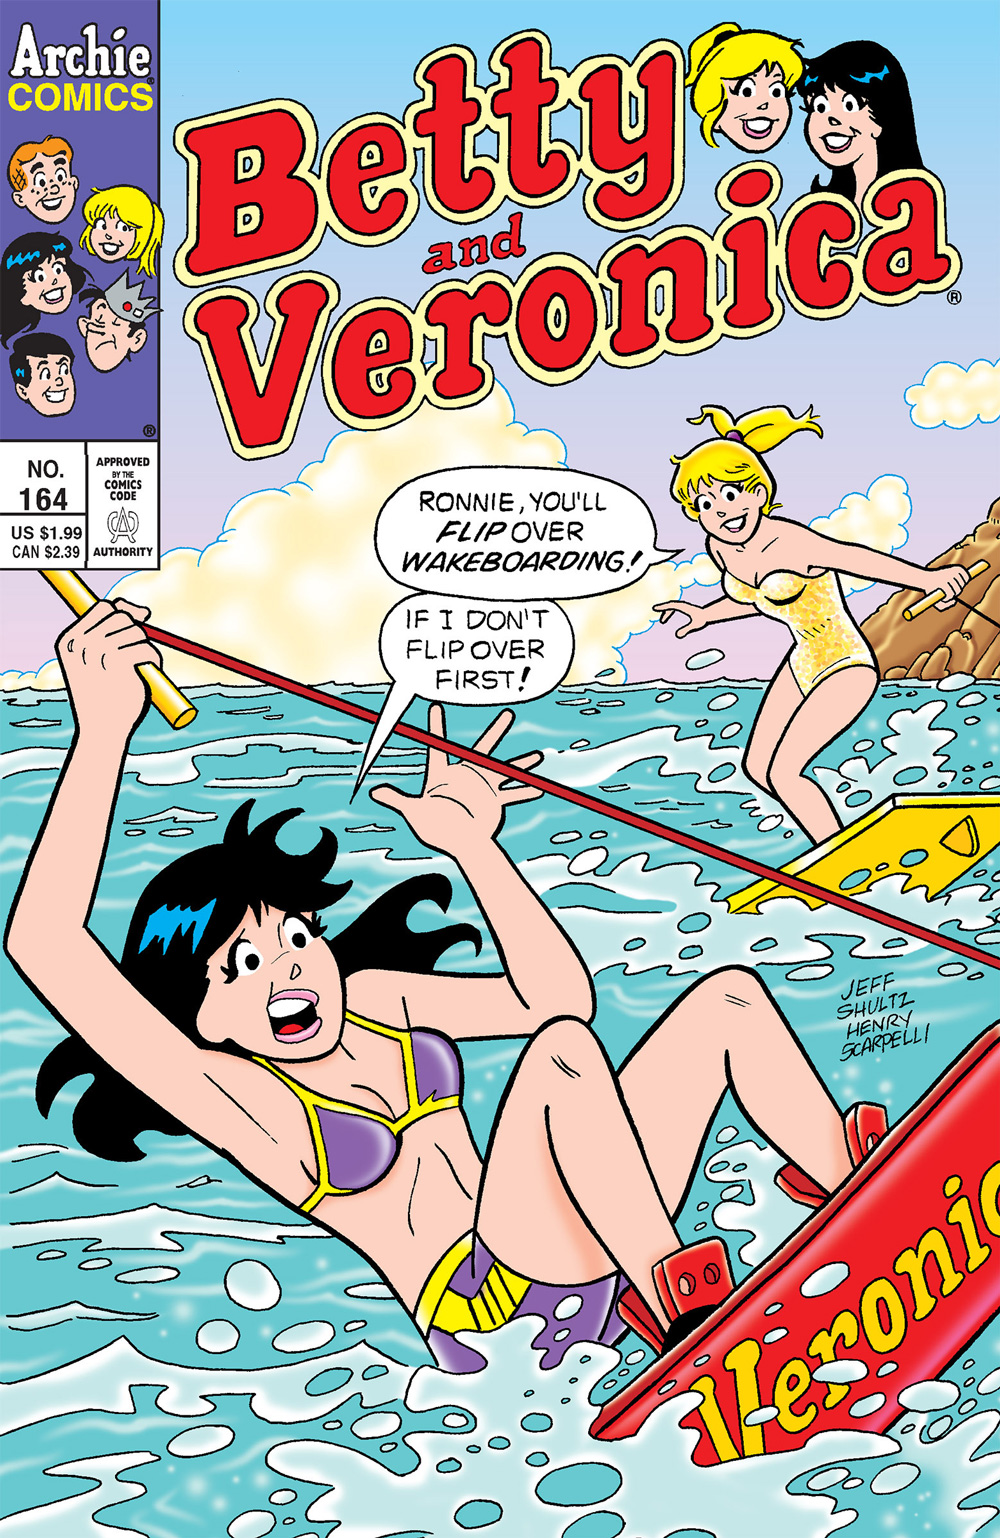 Betty and Veronica are wakeboarding at the beach, and Veronica struggles to stay on her board. Betty says she will flip for wakeboarding and Veronica says she might flip over first.